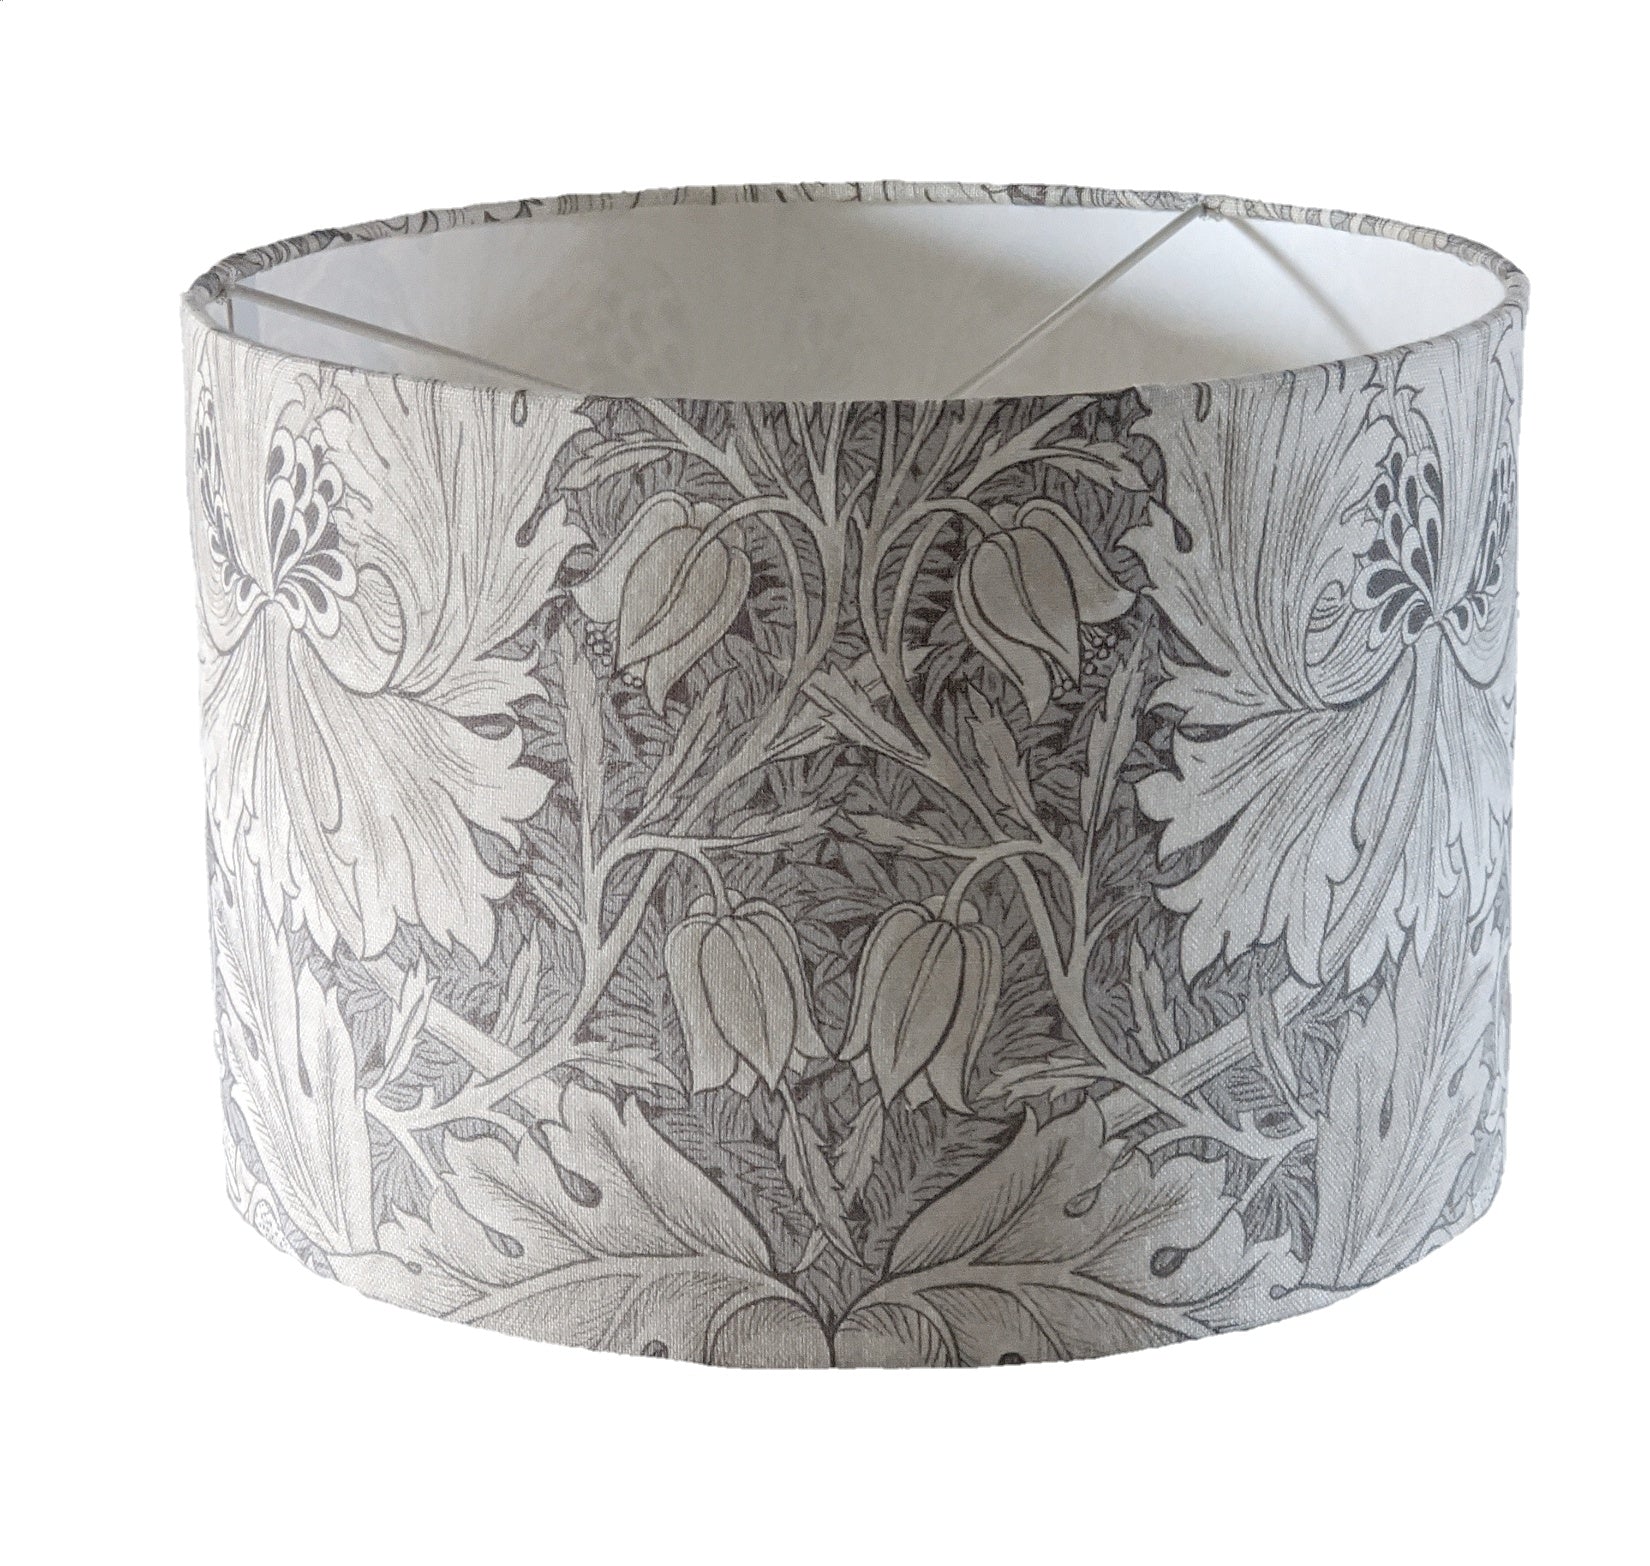 William Morris tulips and chrysanthemums lampshade for a ceiling pendant -  20cm, 30cm and 40cm